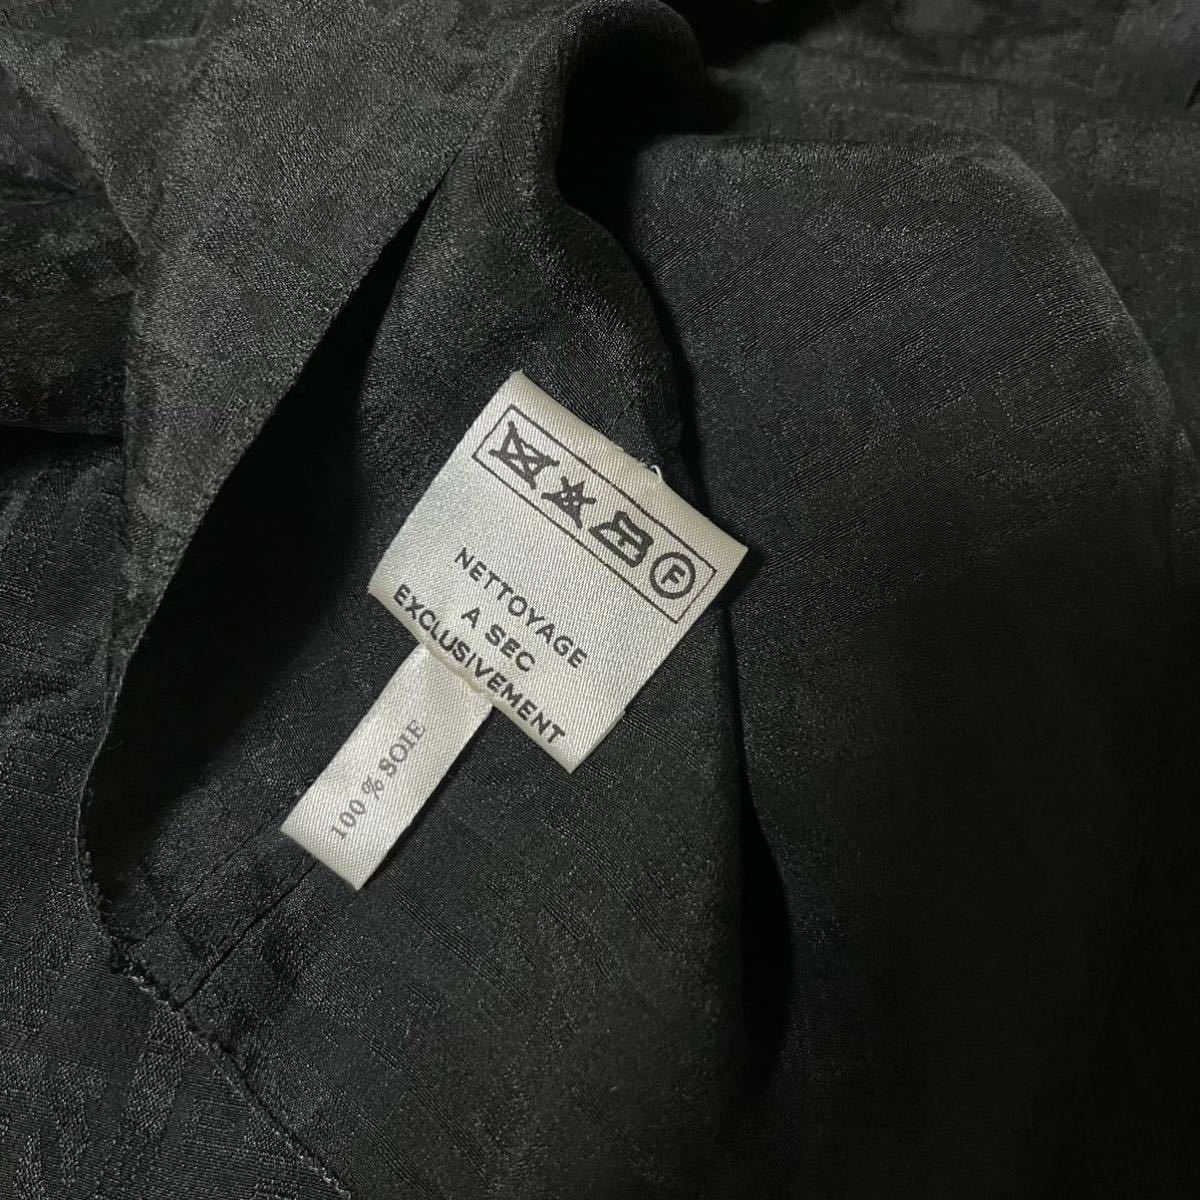 90s HERMES SILK 100% l/s shirt 総柄シャツ 長袖 made in france 36 黒　エルメス ヴィンテージ 90年代 絹 シルク _画像7